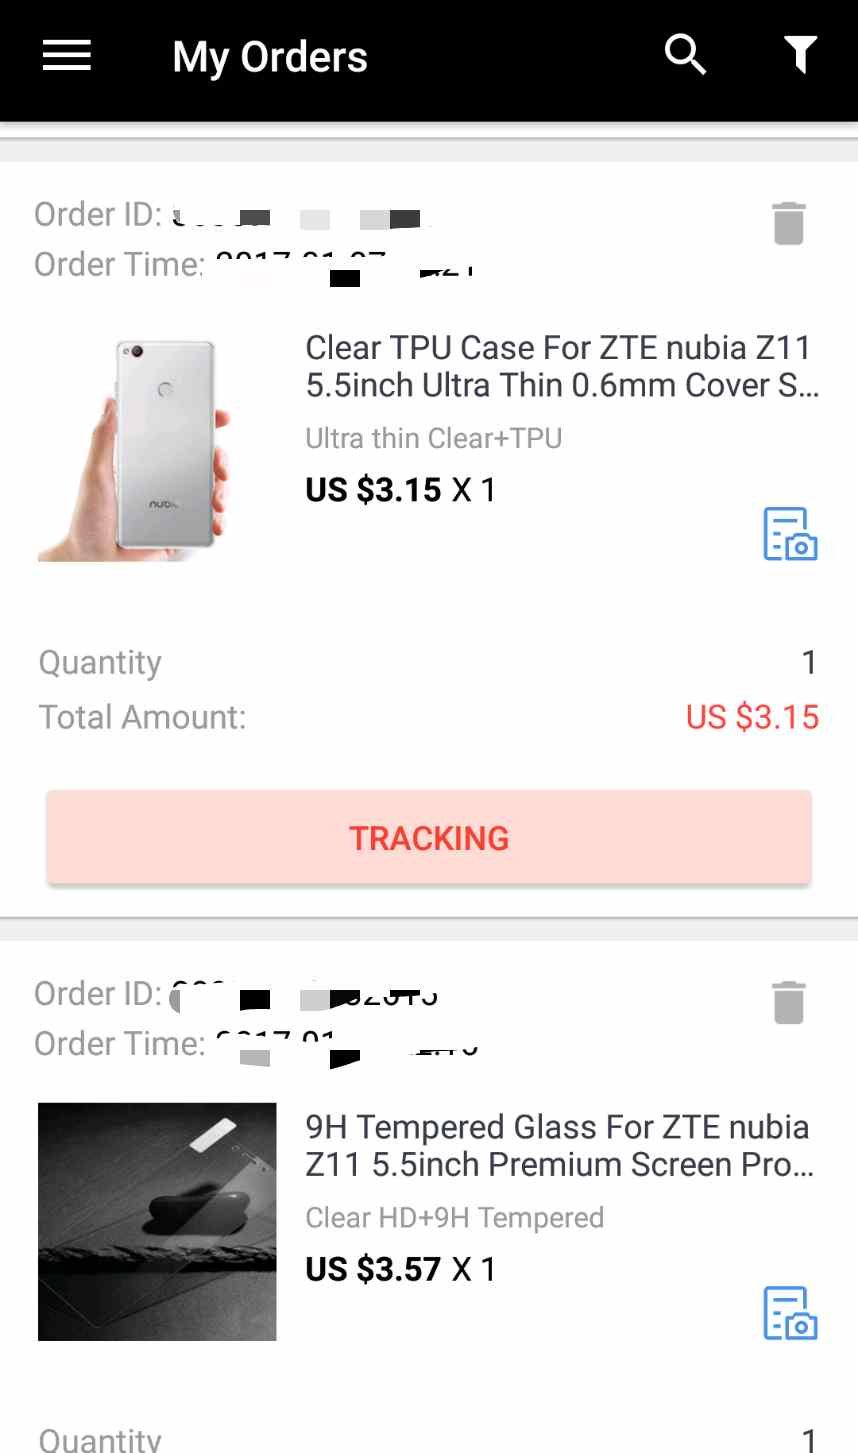 How to buy from Aliexpress and Banggood Safely